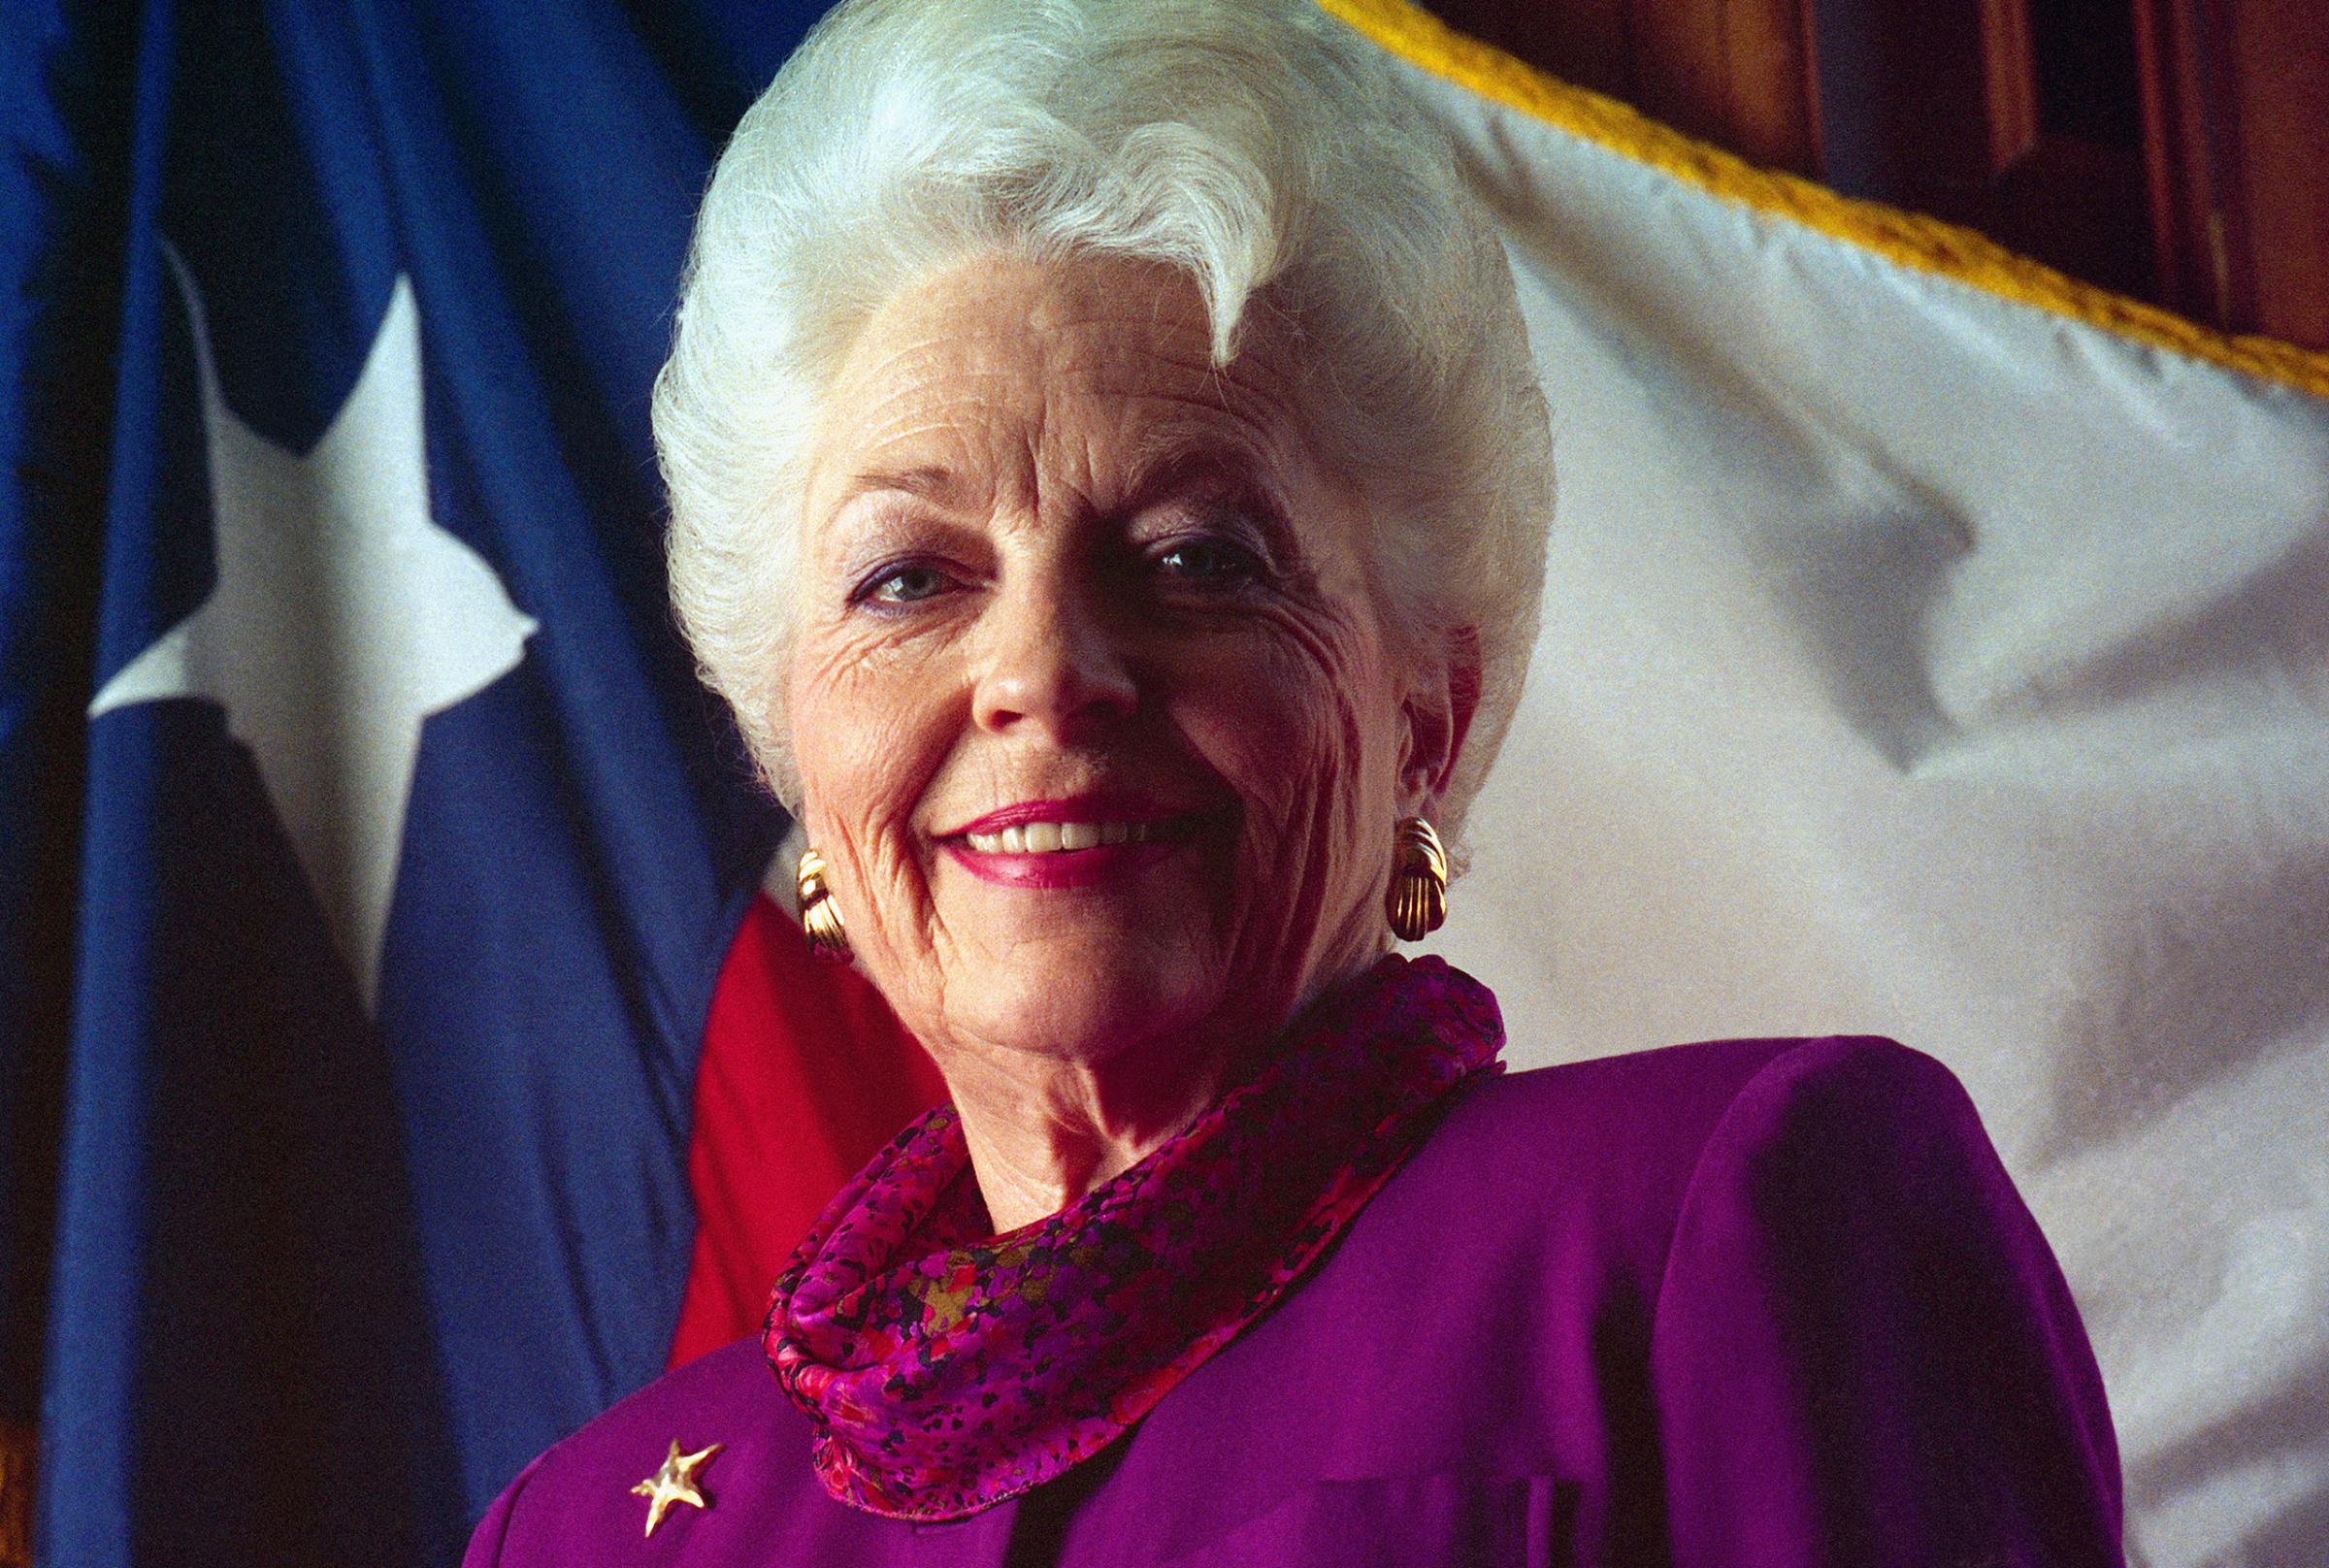 Texas governor Ann Richards at the Democratic National Convention on July 13, 1992 in New York.